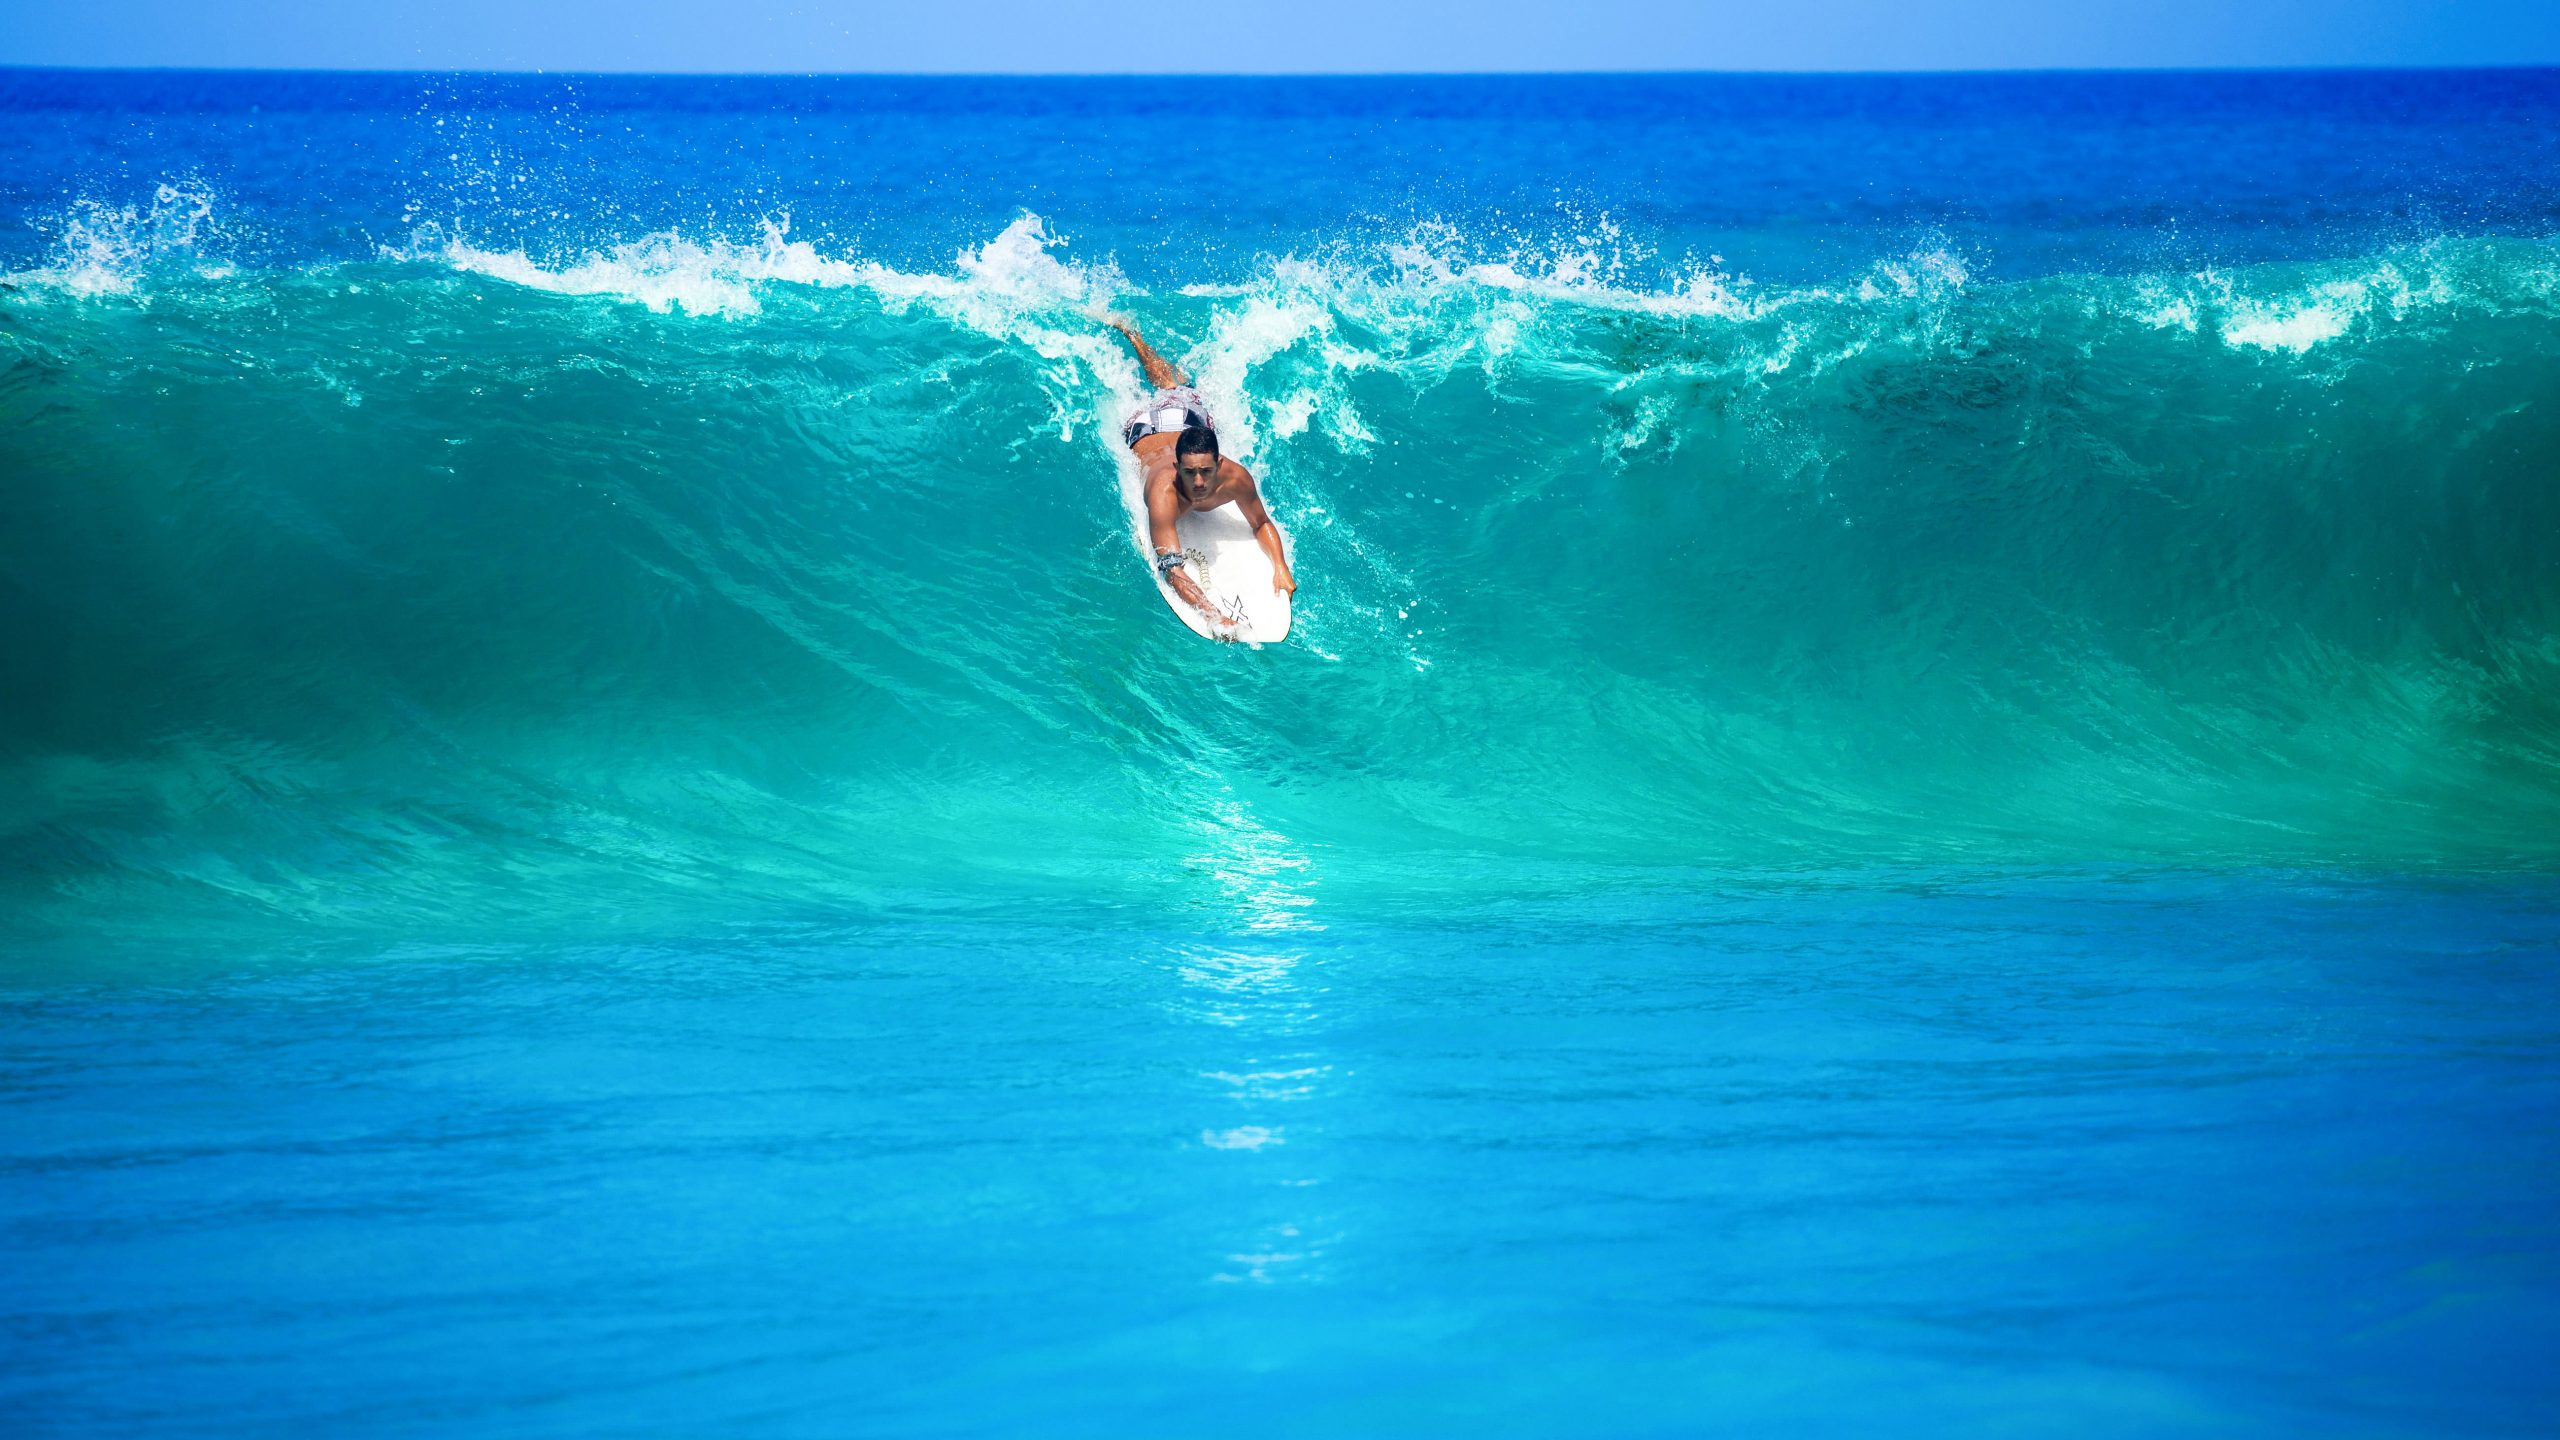 Photography of man surfing on body of water during day time, Ocean Wave